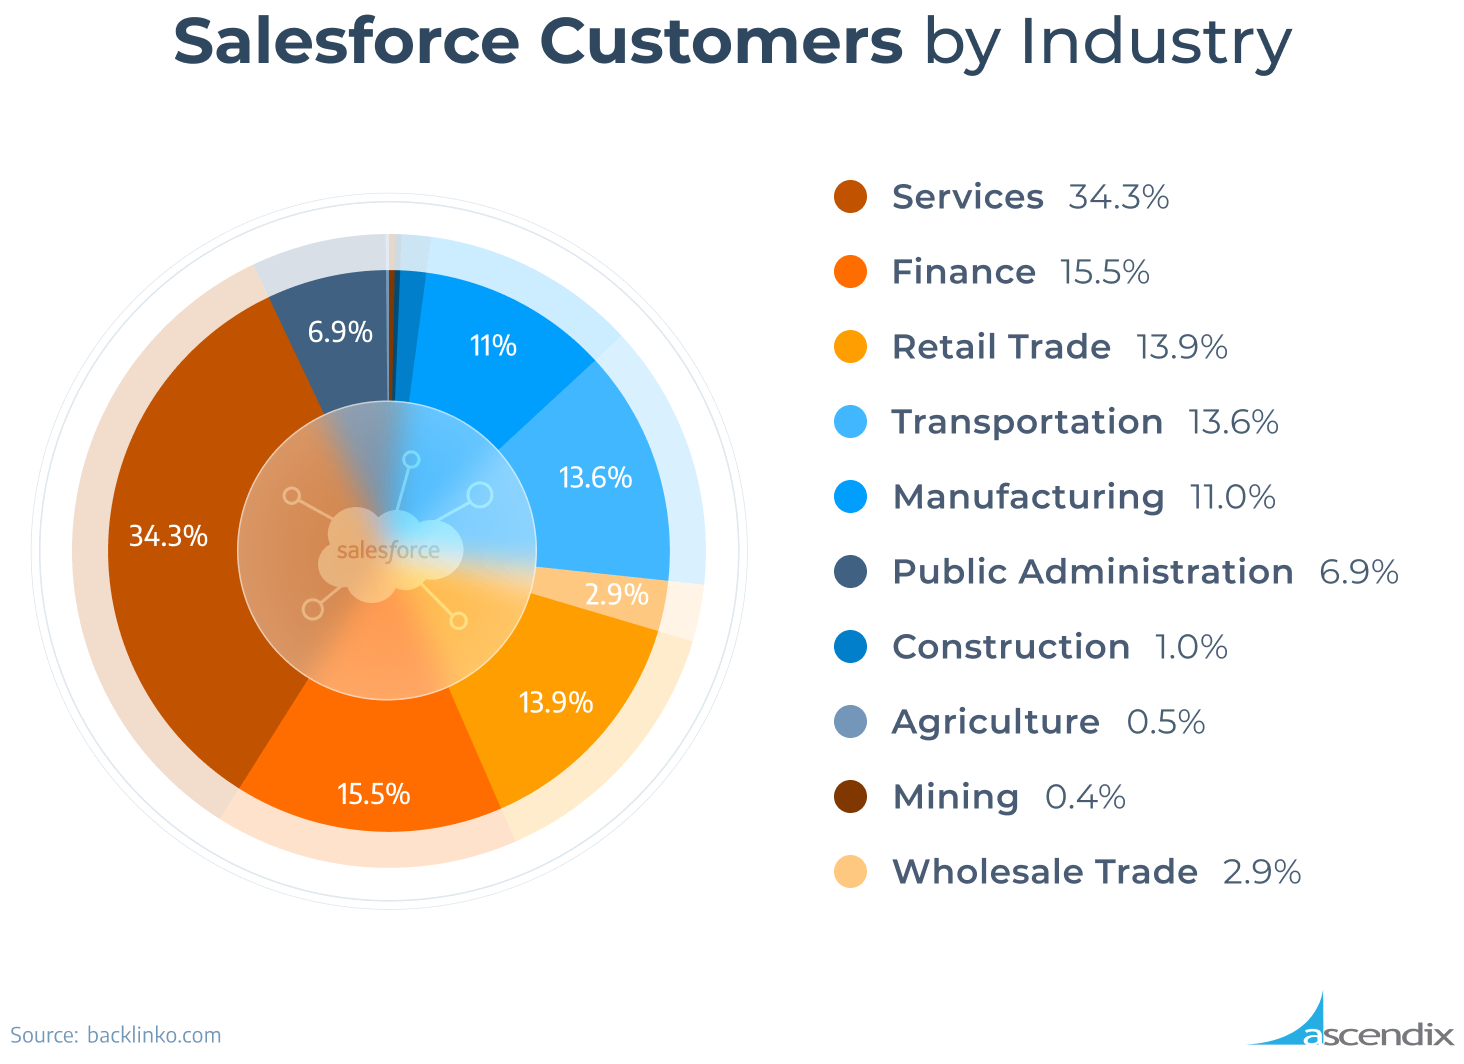 Pie chart showing the division of Salesforce customers by industry